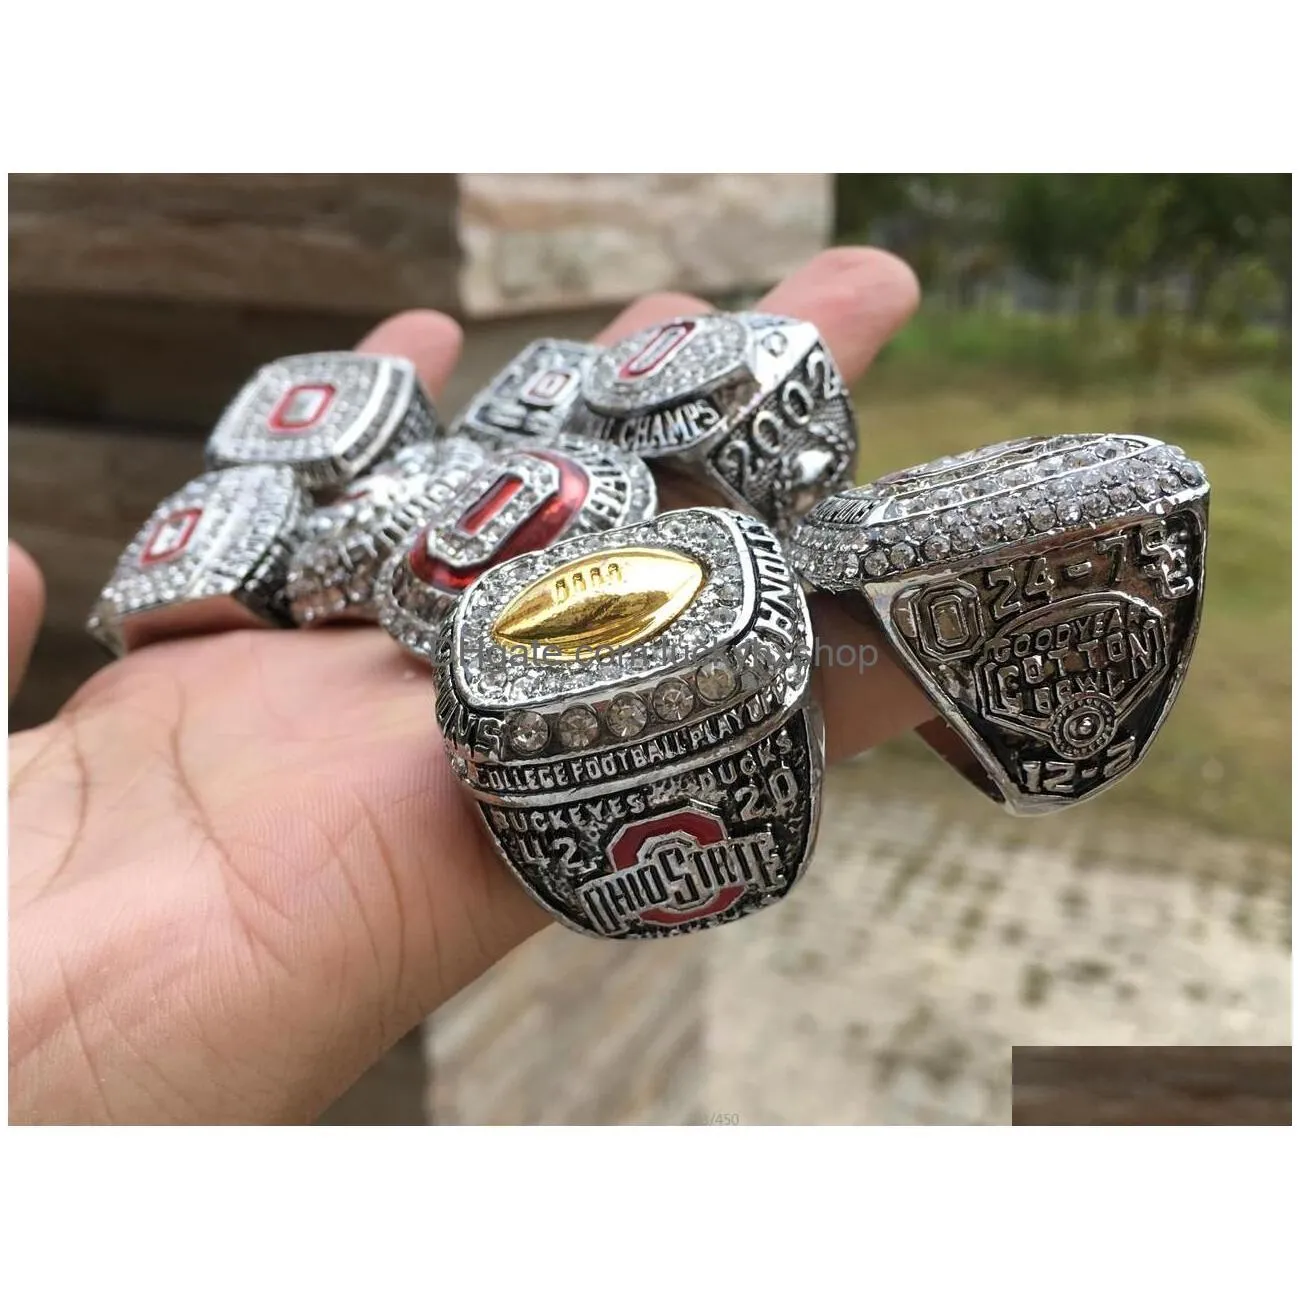 17pcs ohio state buckeyes national champion championship ring set solid men fan brithday gift wholesale drop shipping